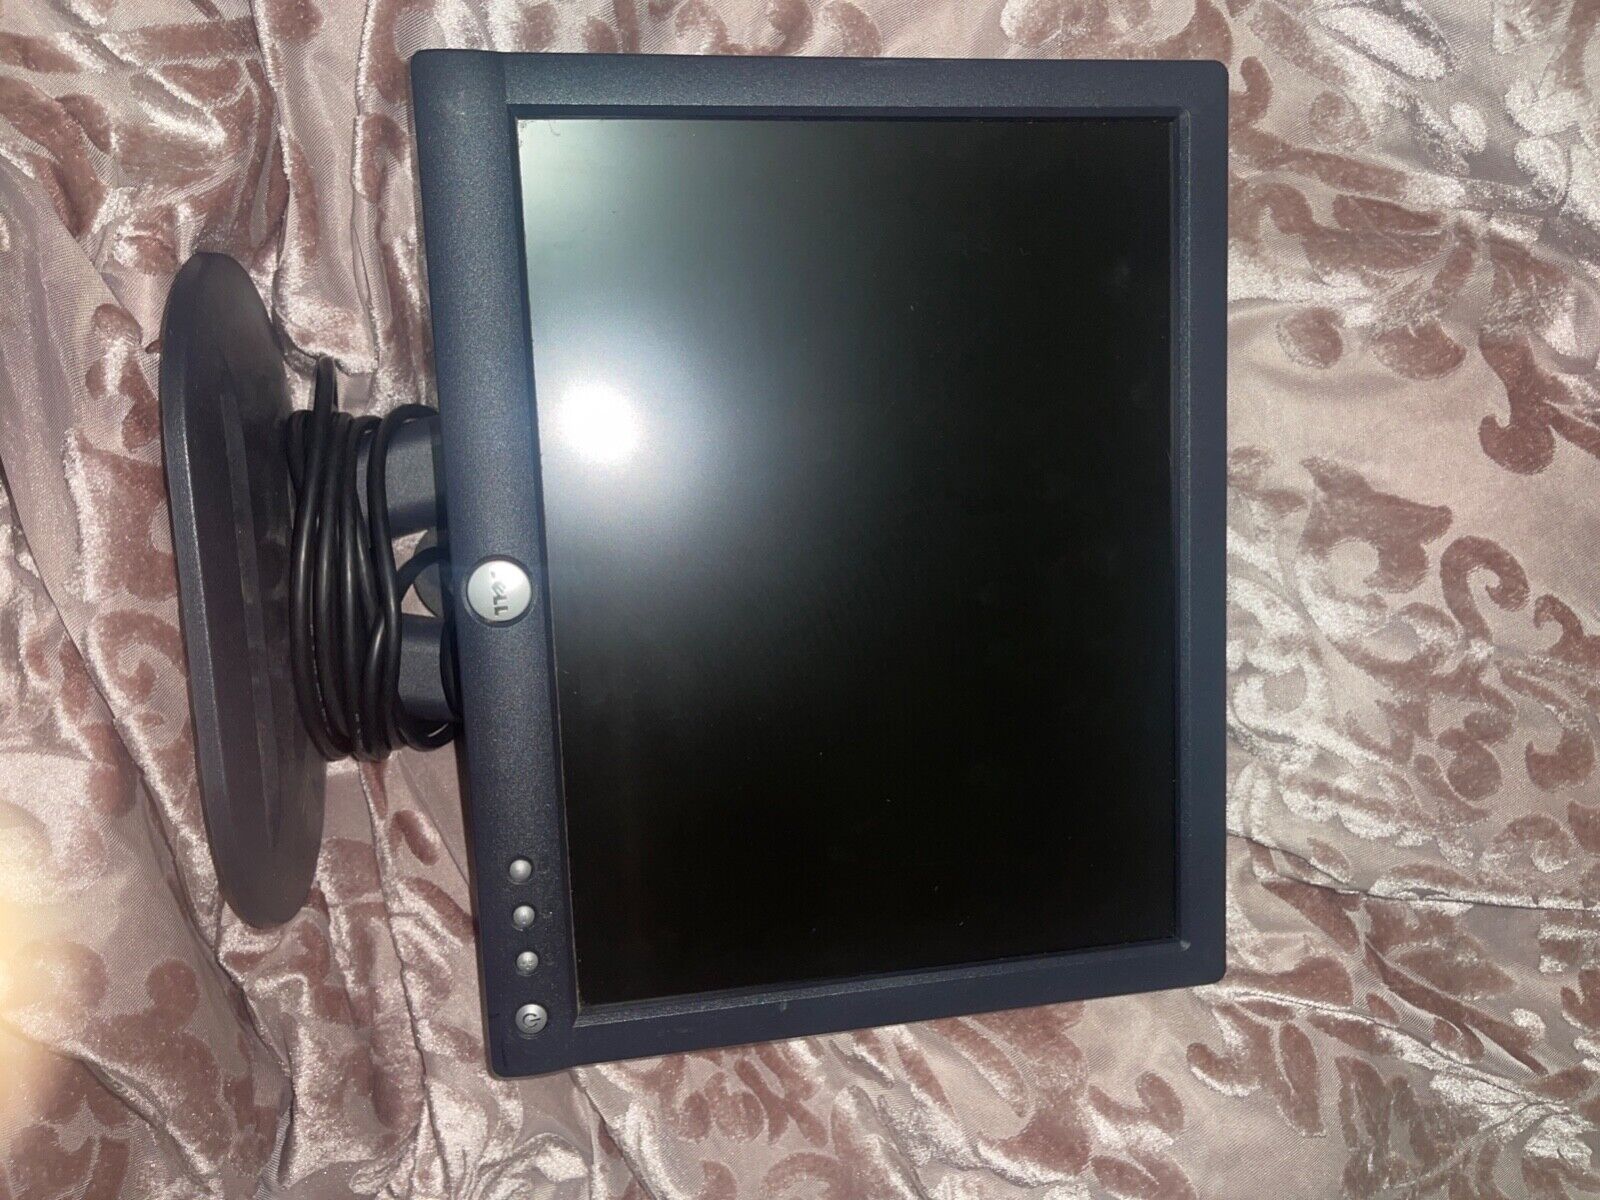 Dell Computer Monitor. Used but good condition. Don’t need anymore. 15in